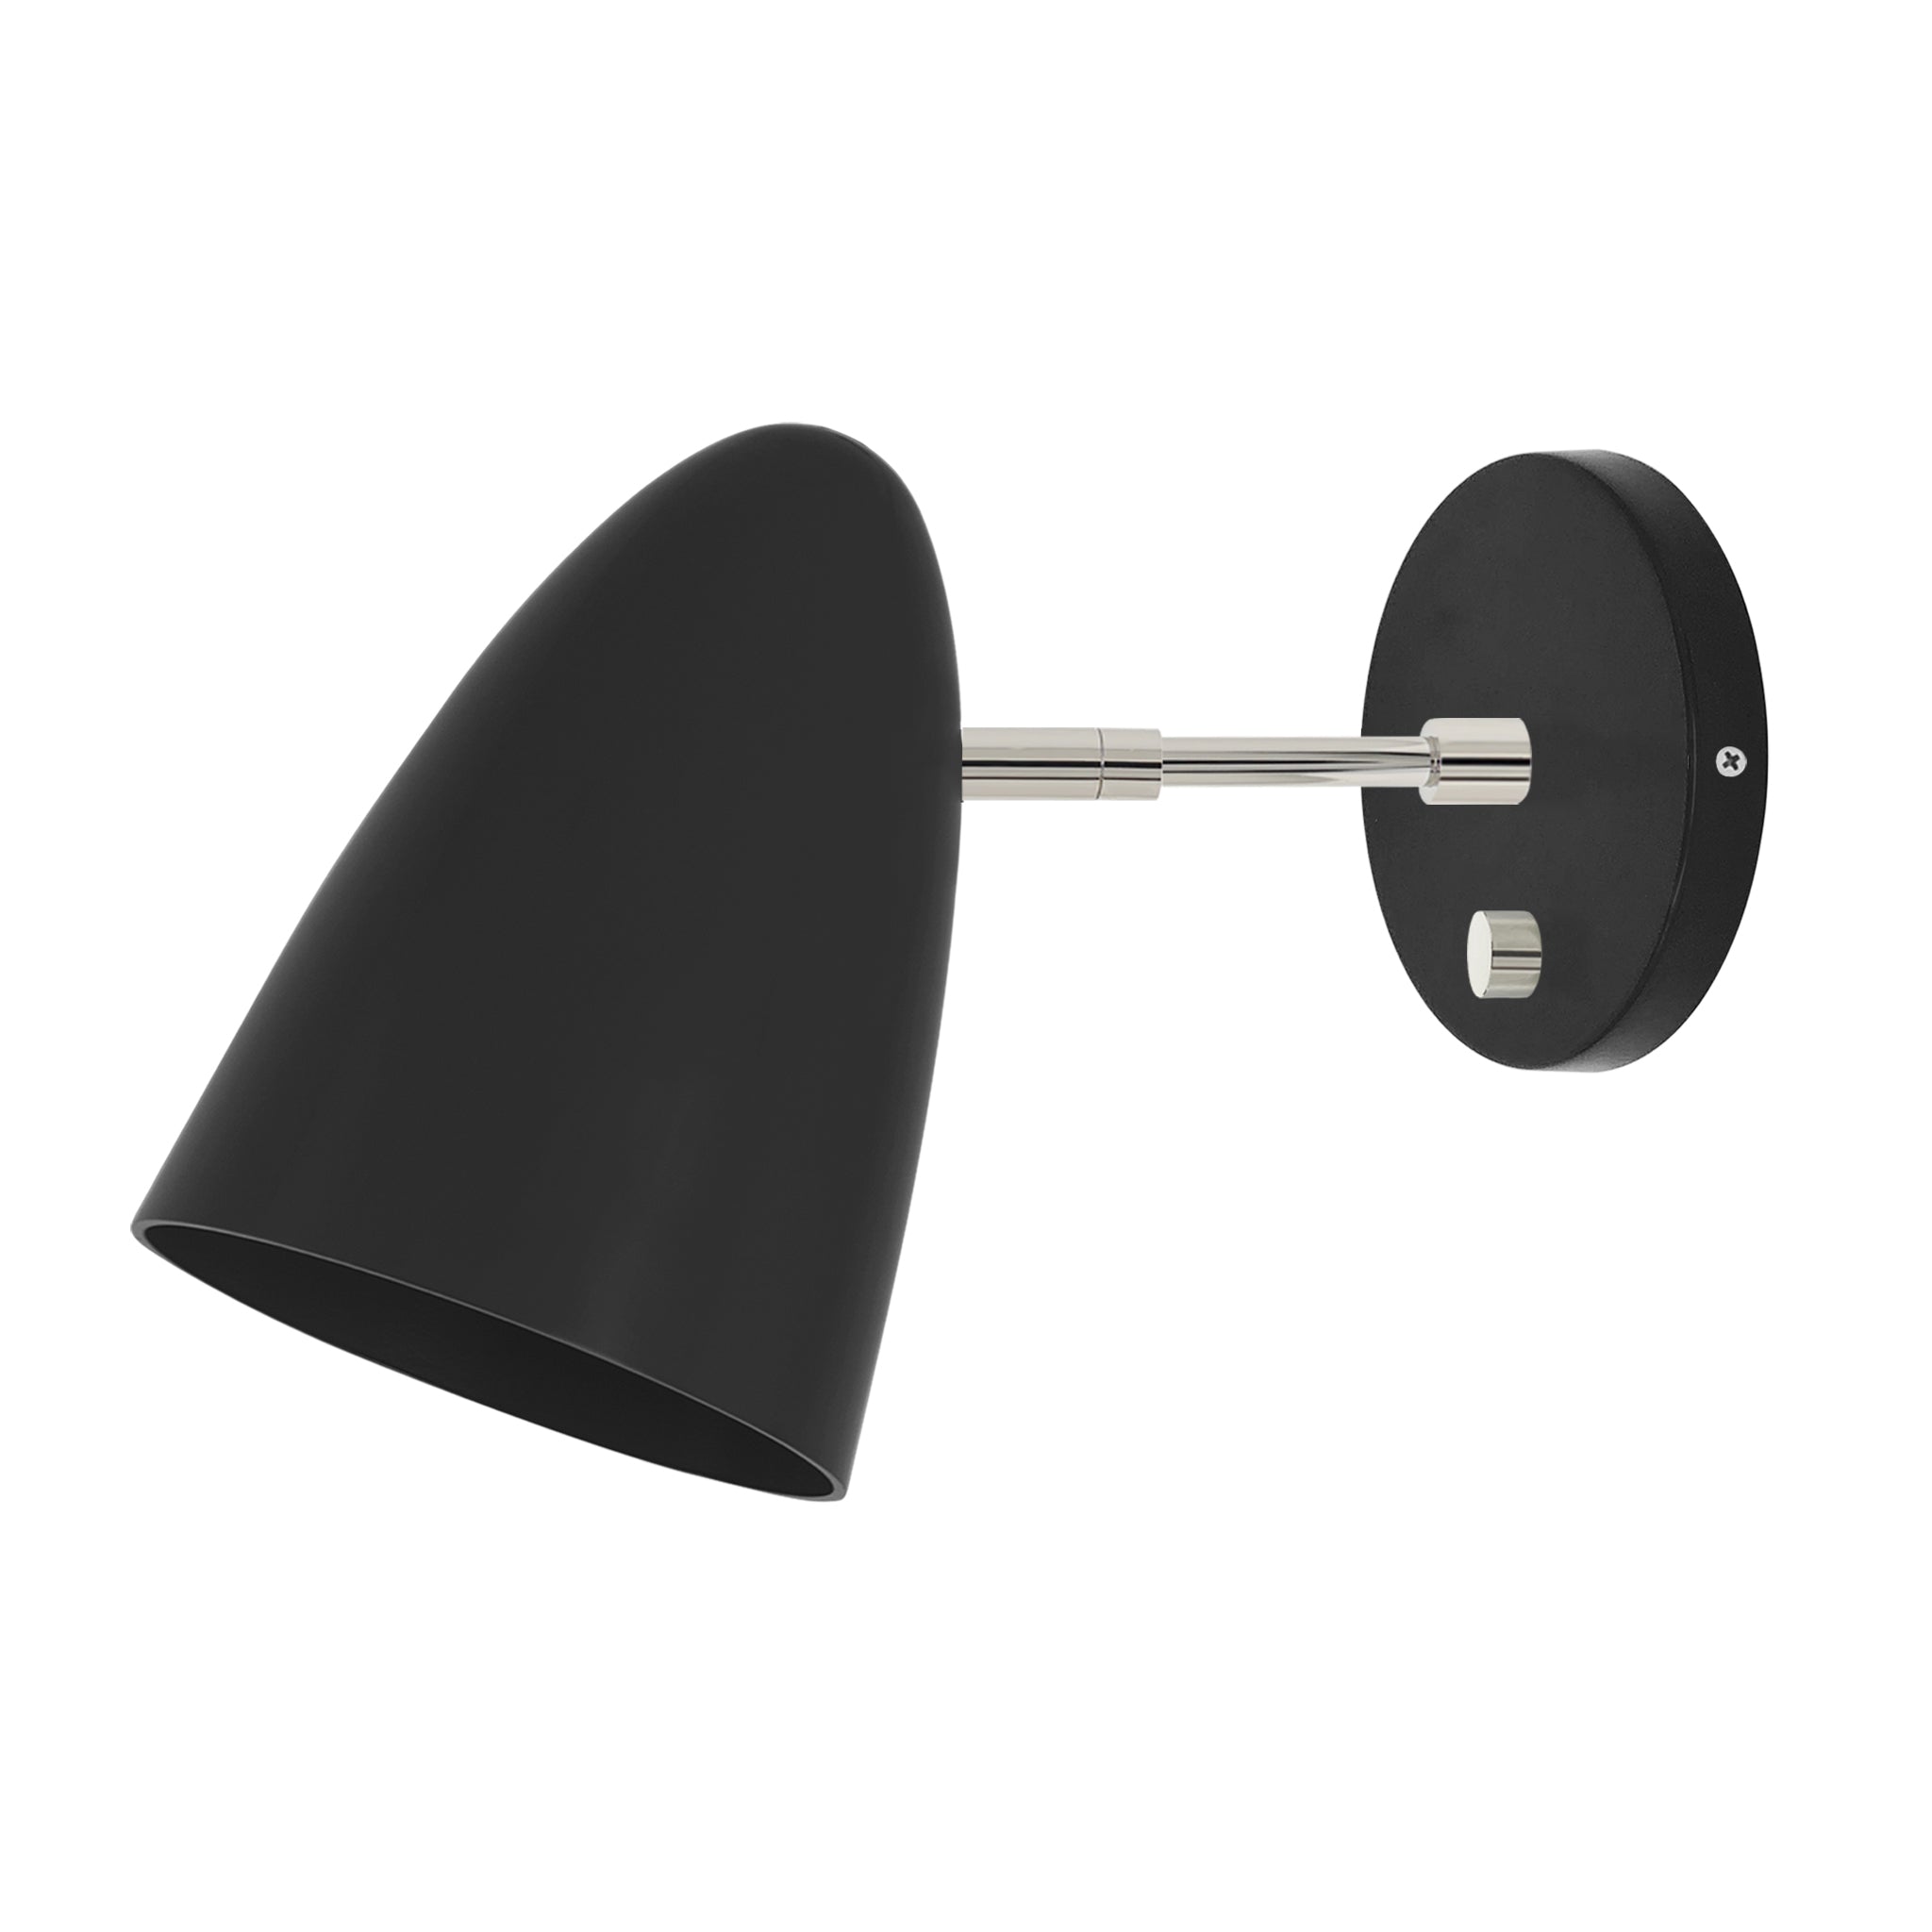 Nickel and black color Boom sconce 3" arm Dutton Brown lighting